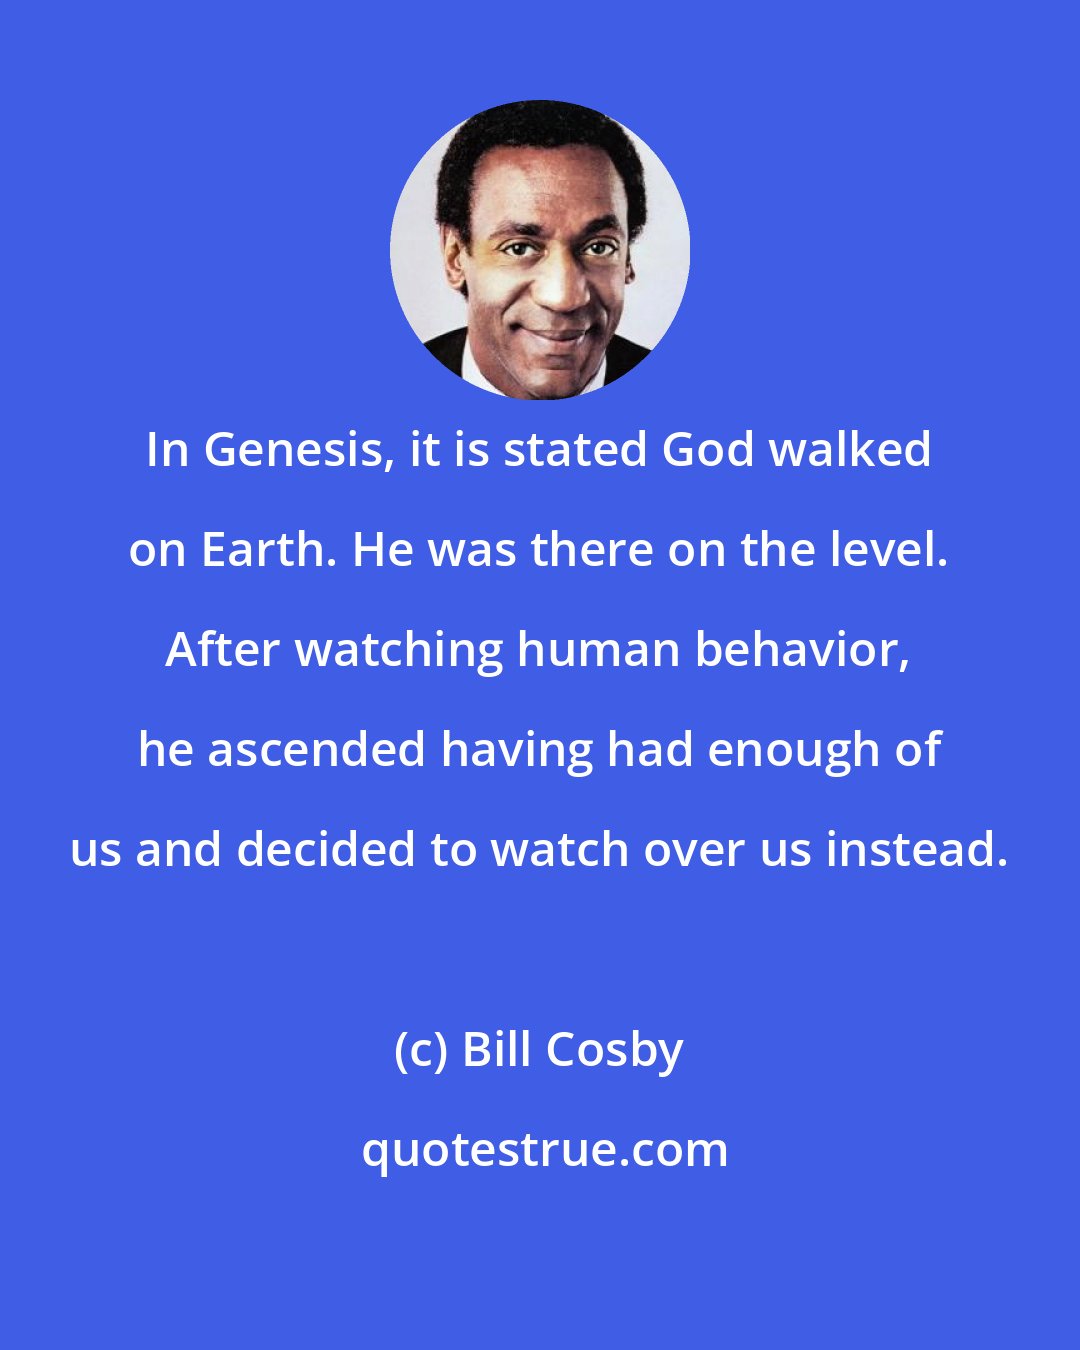 Bill Cosby: In Genesis, it is stated God walked on Earth. He was there on the level. After watching human behavior, he ascended having had enough of us and decided to watch over us instead.